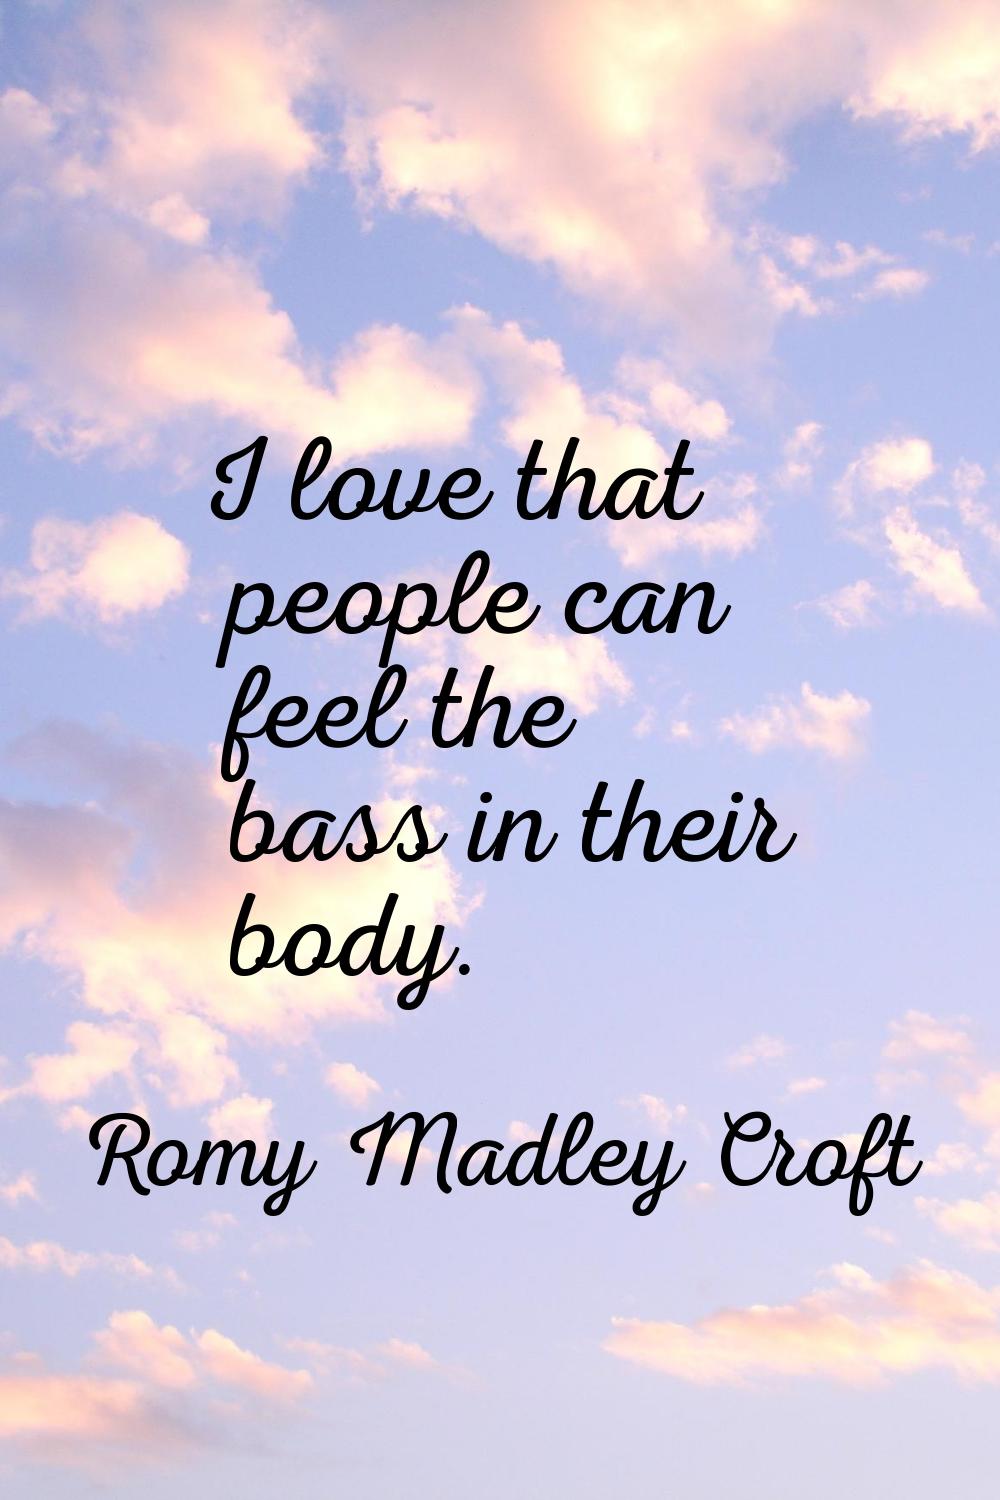 I love that people can feel the bass in their body.